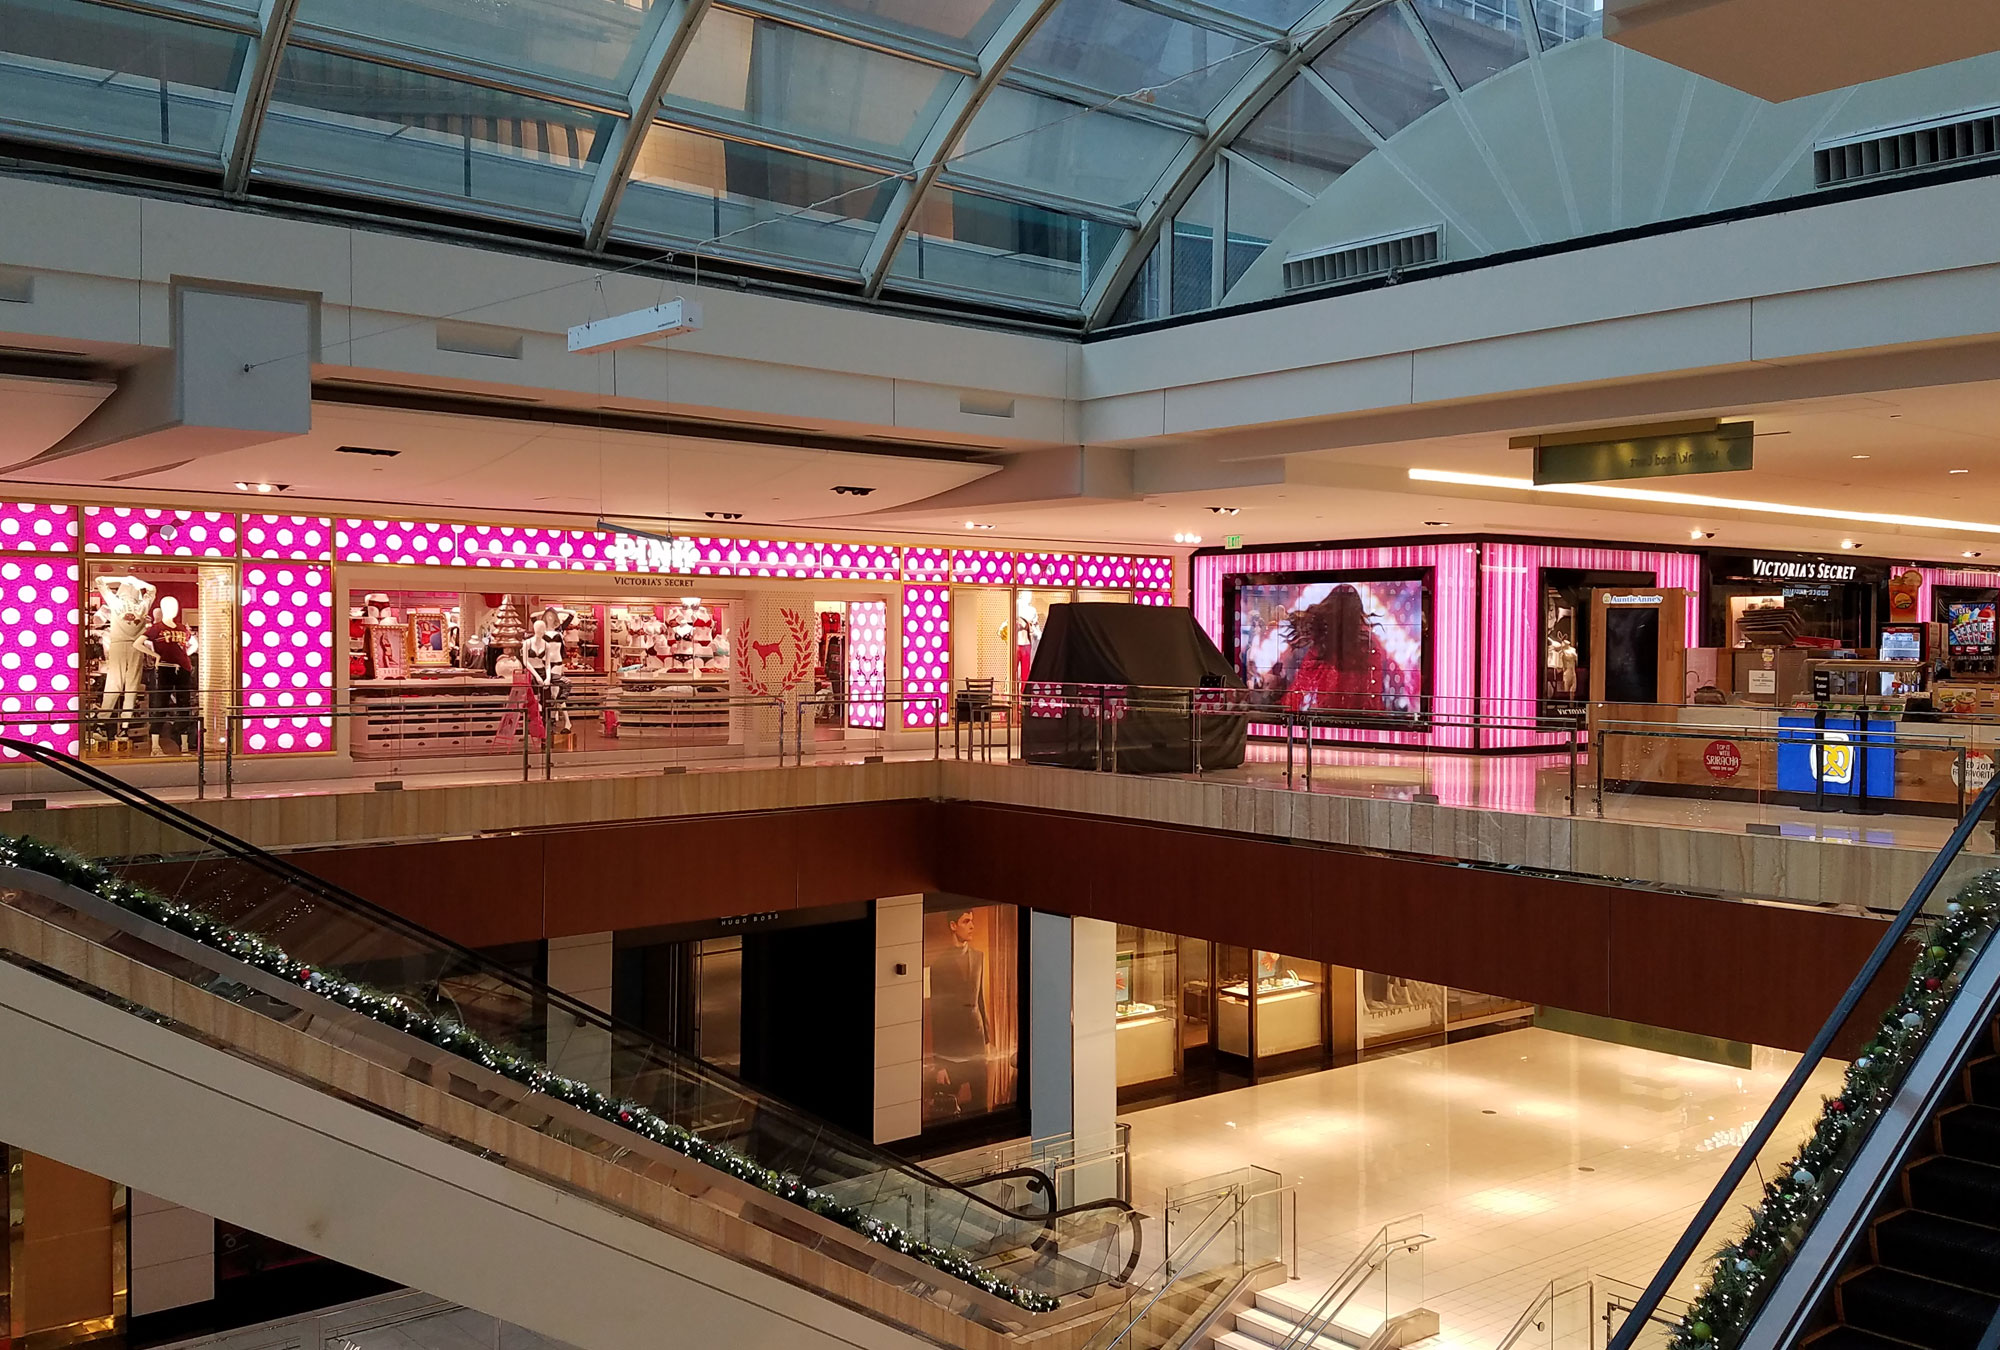 Victorias Secret Retail Contractor Houston TX Mall View by Fred Olivieri